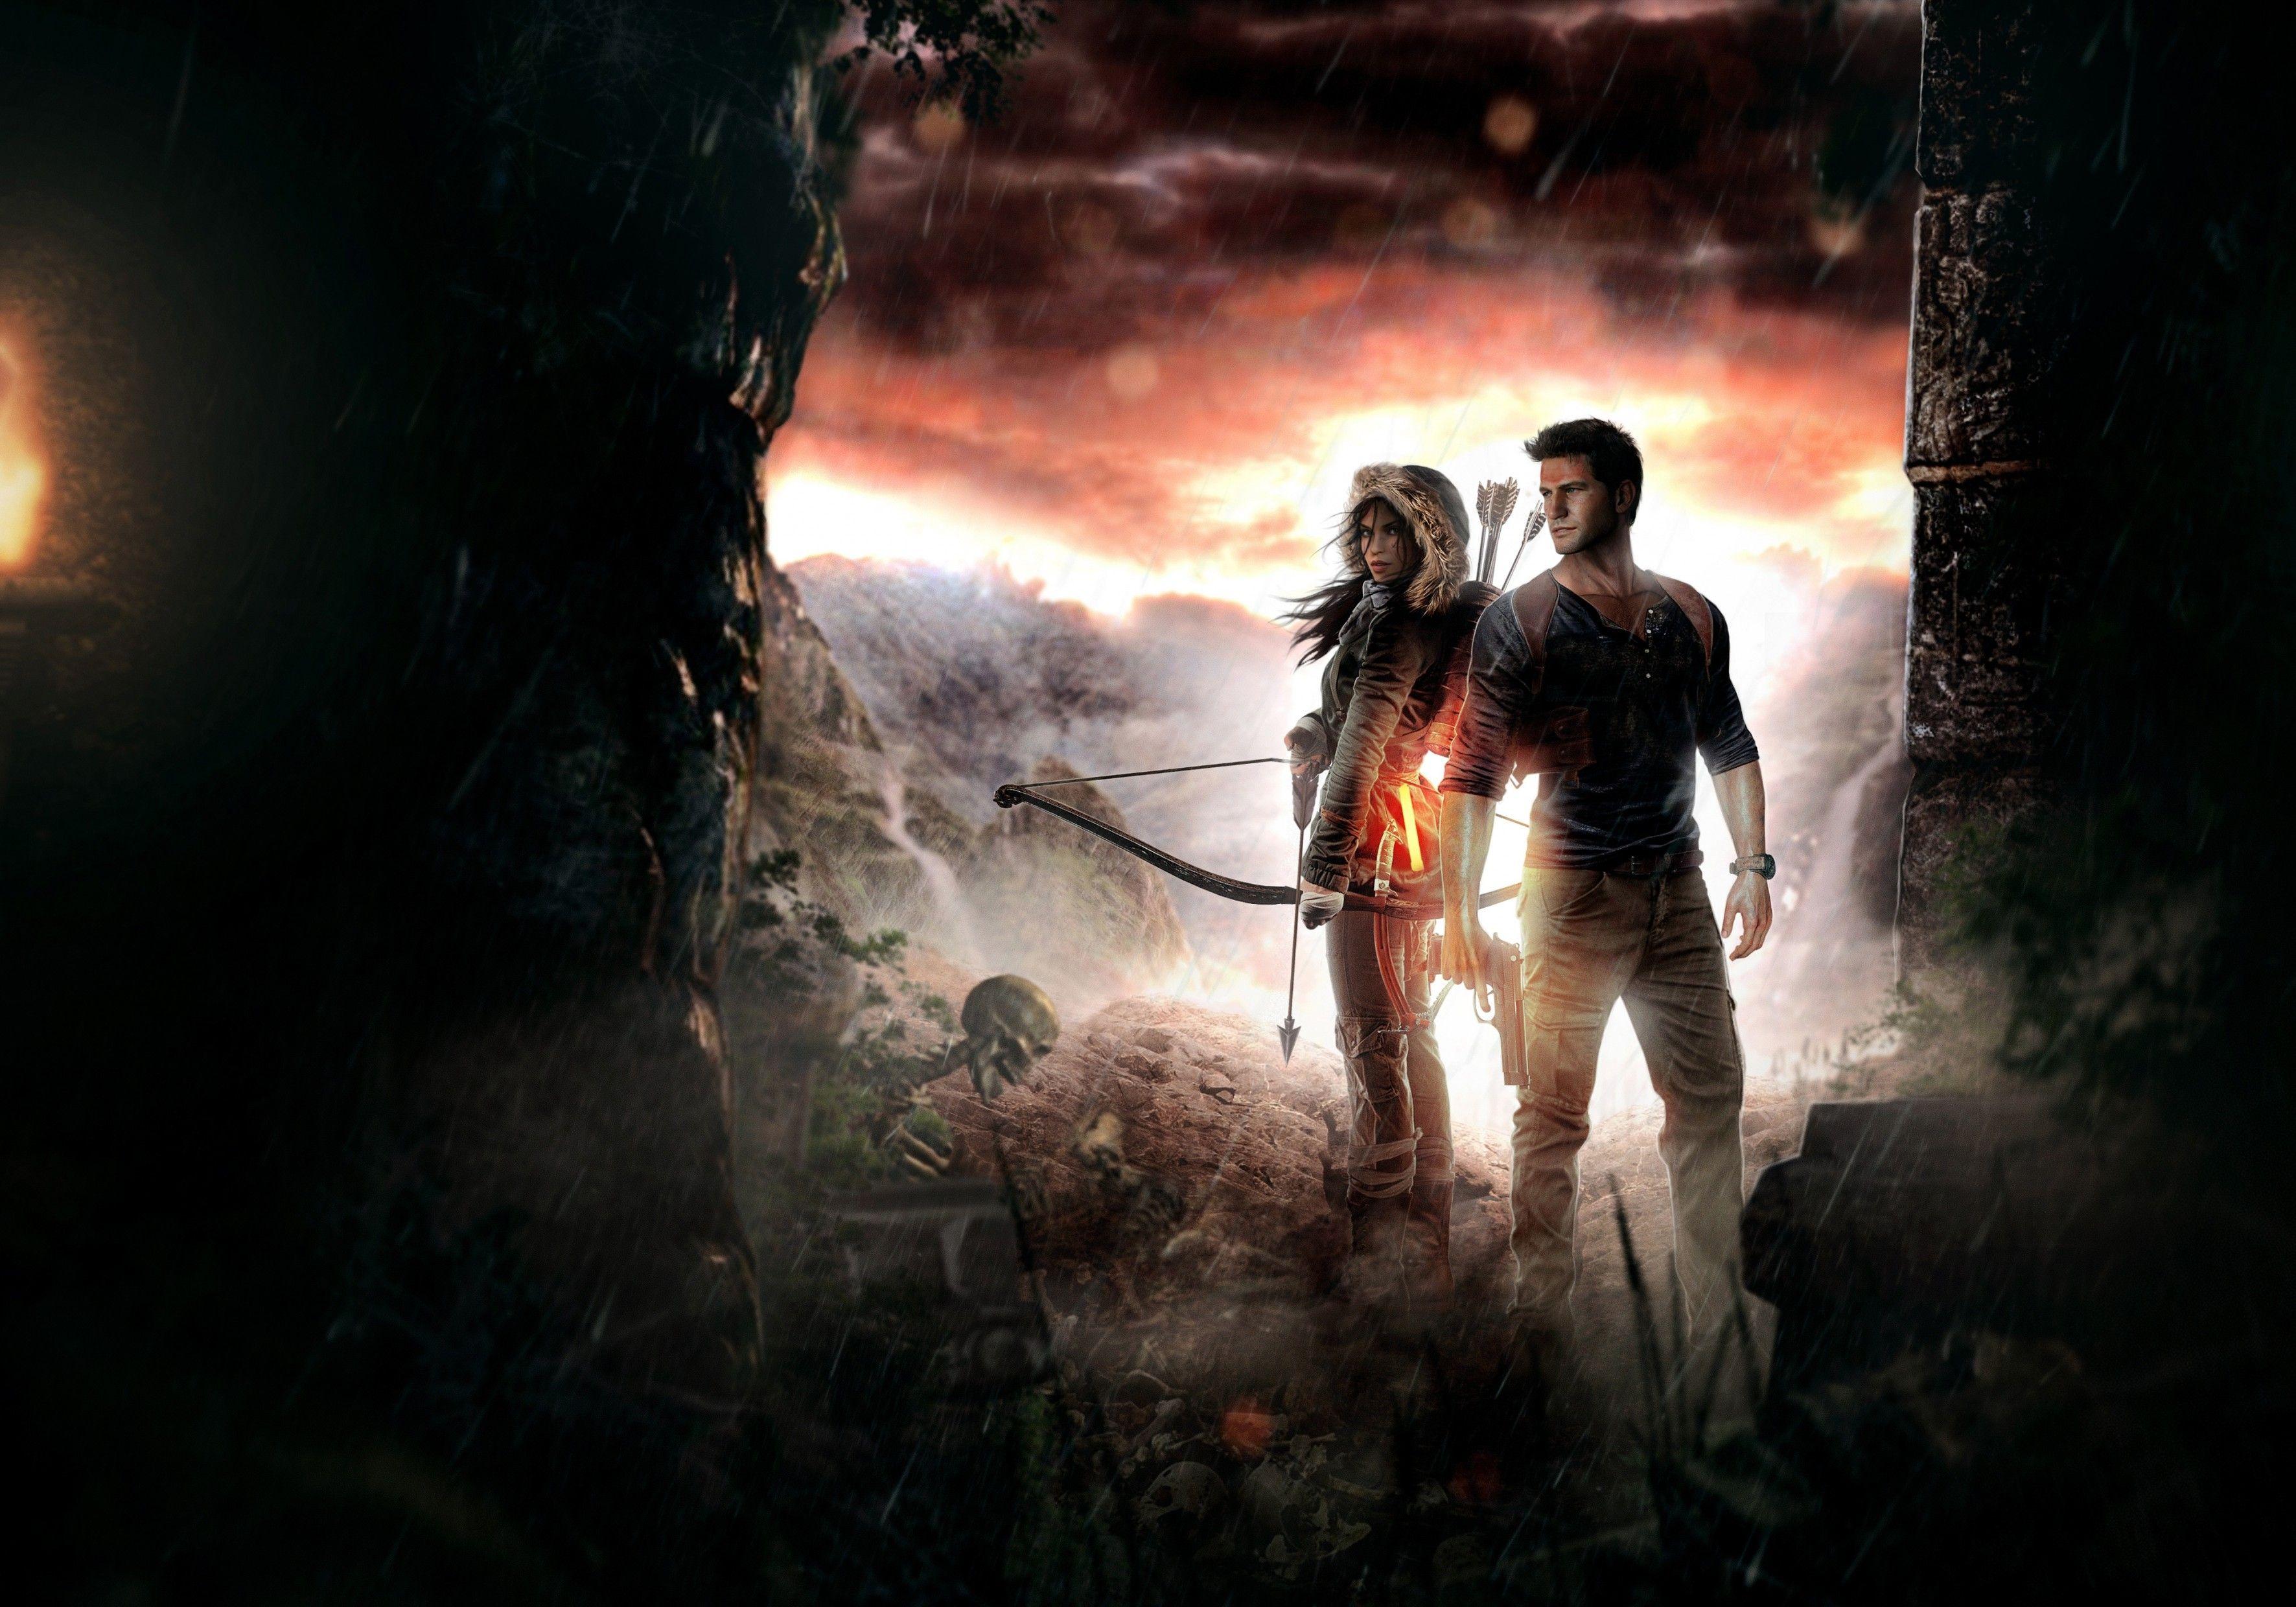 Download 3543x2480 Rise Of The Tomb Rider, Uncharted Lara Croft